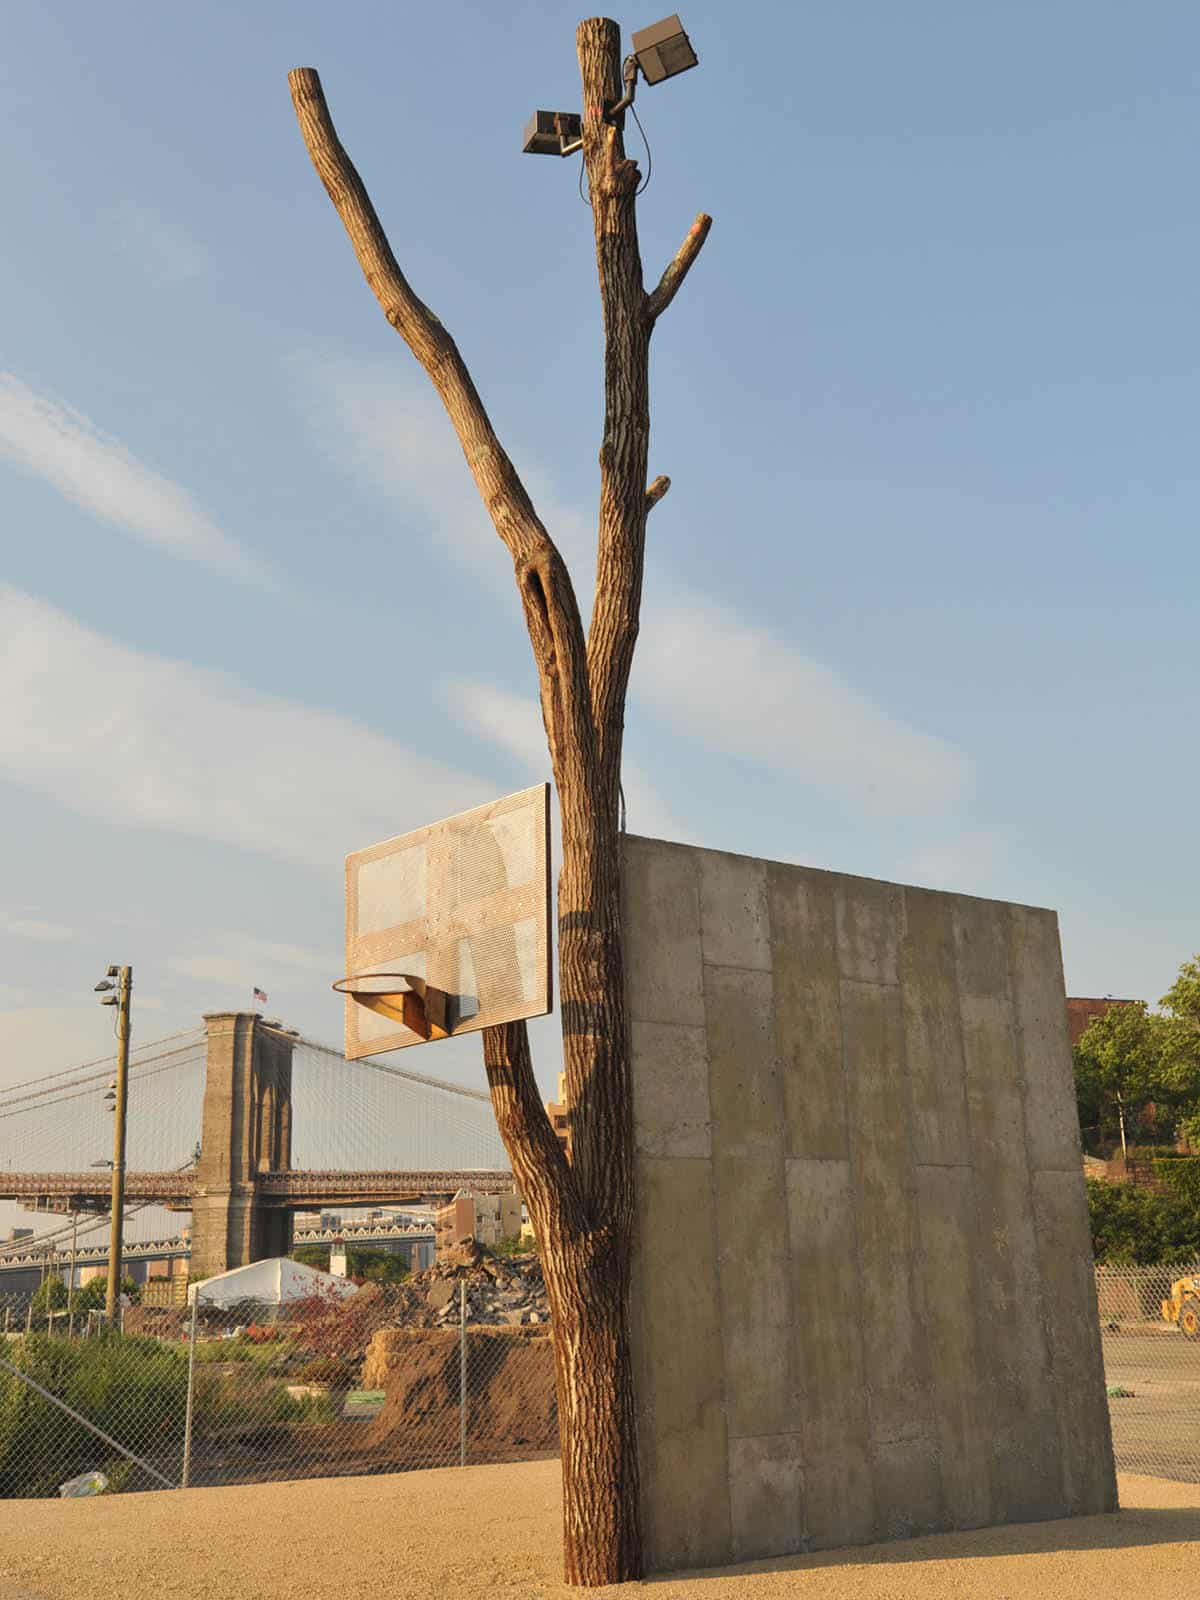 People by Oscar Tuazon, part of his series People. A tree with a basketball hoop attached to a branch and the trunk beside a concrete wall at sunset.